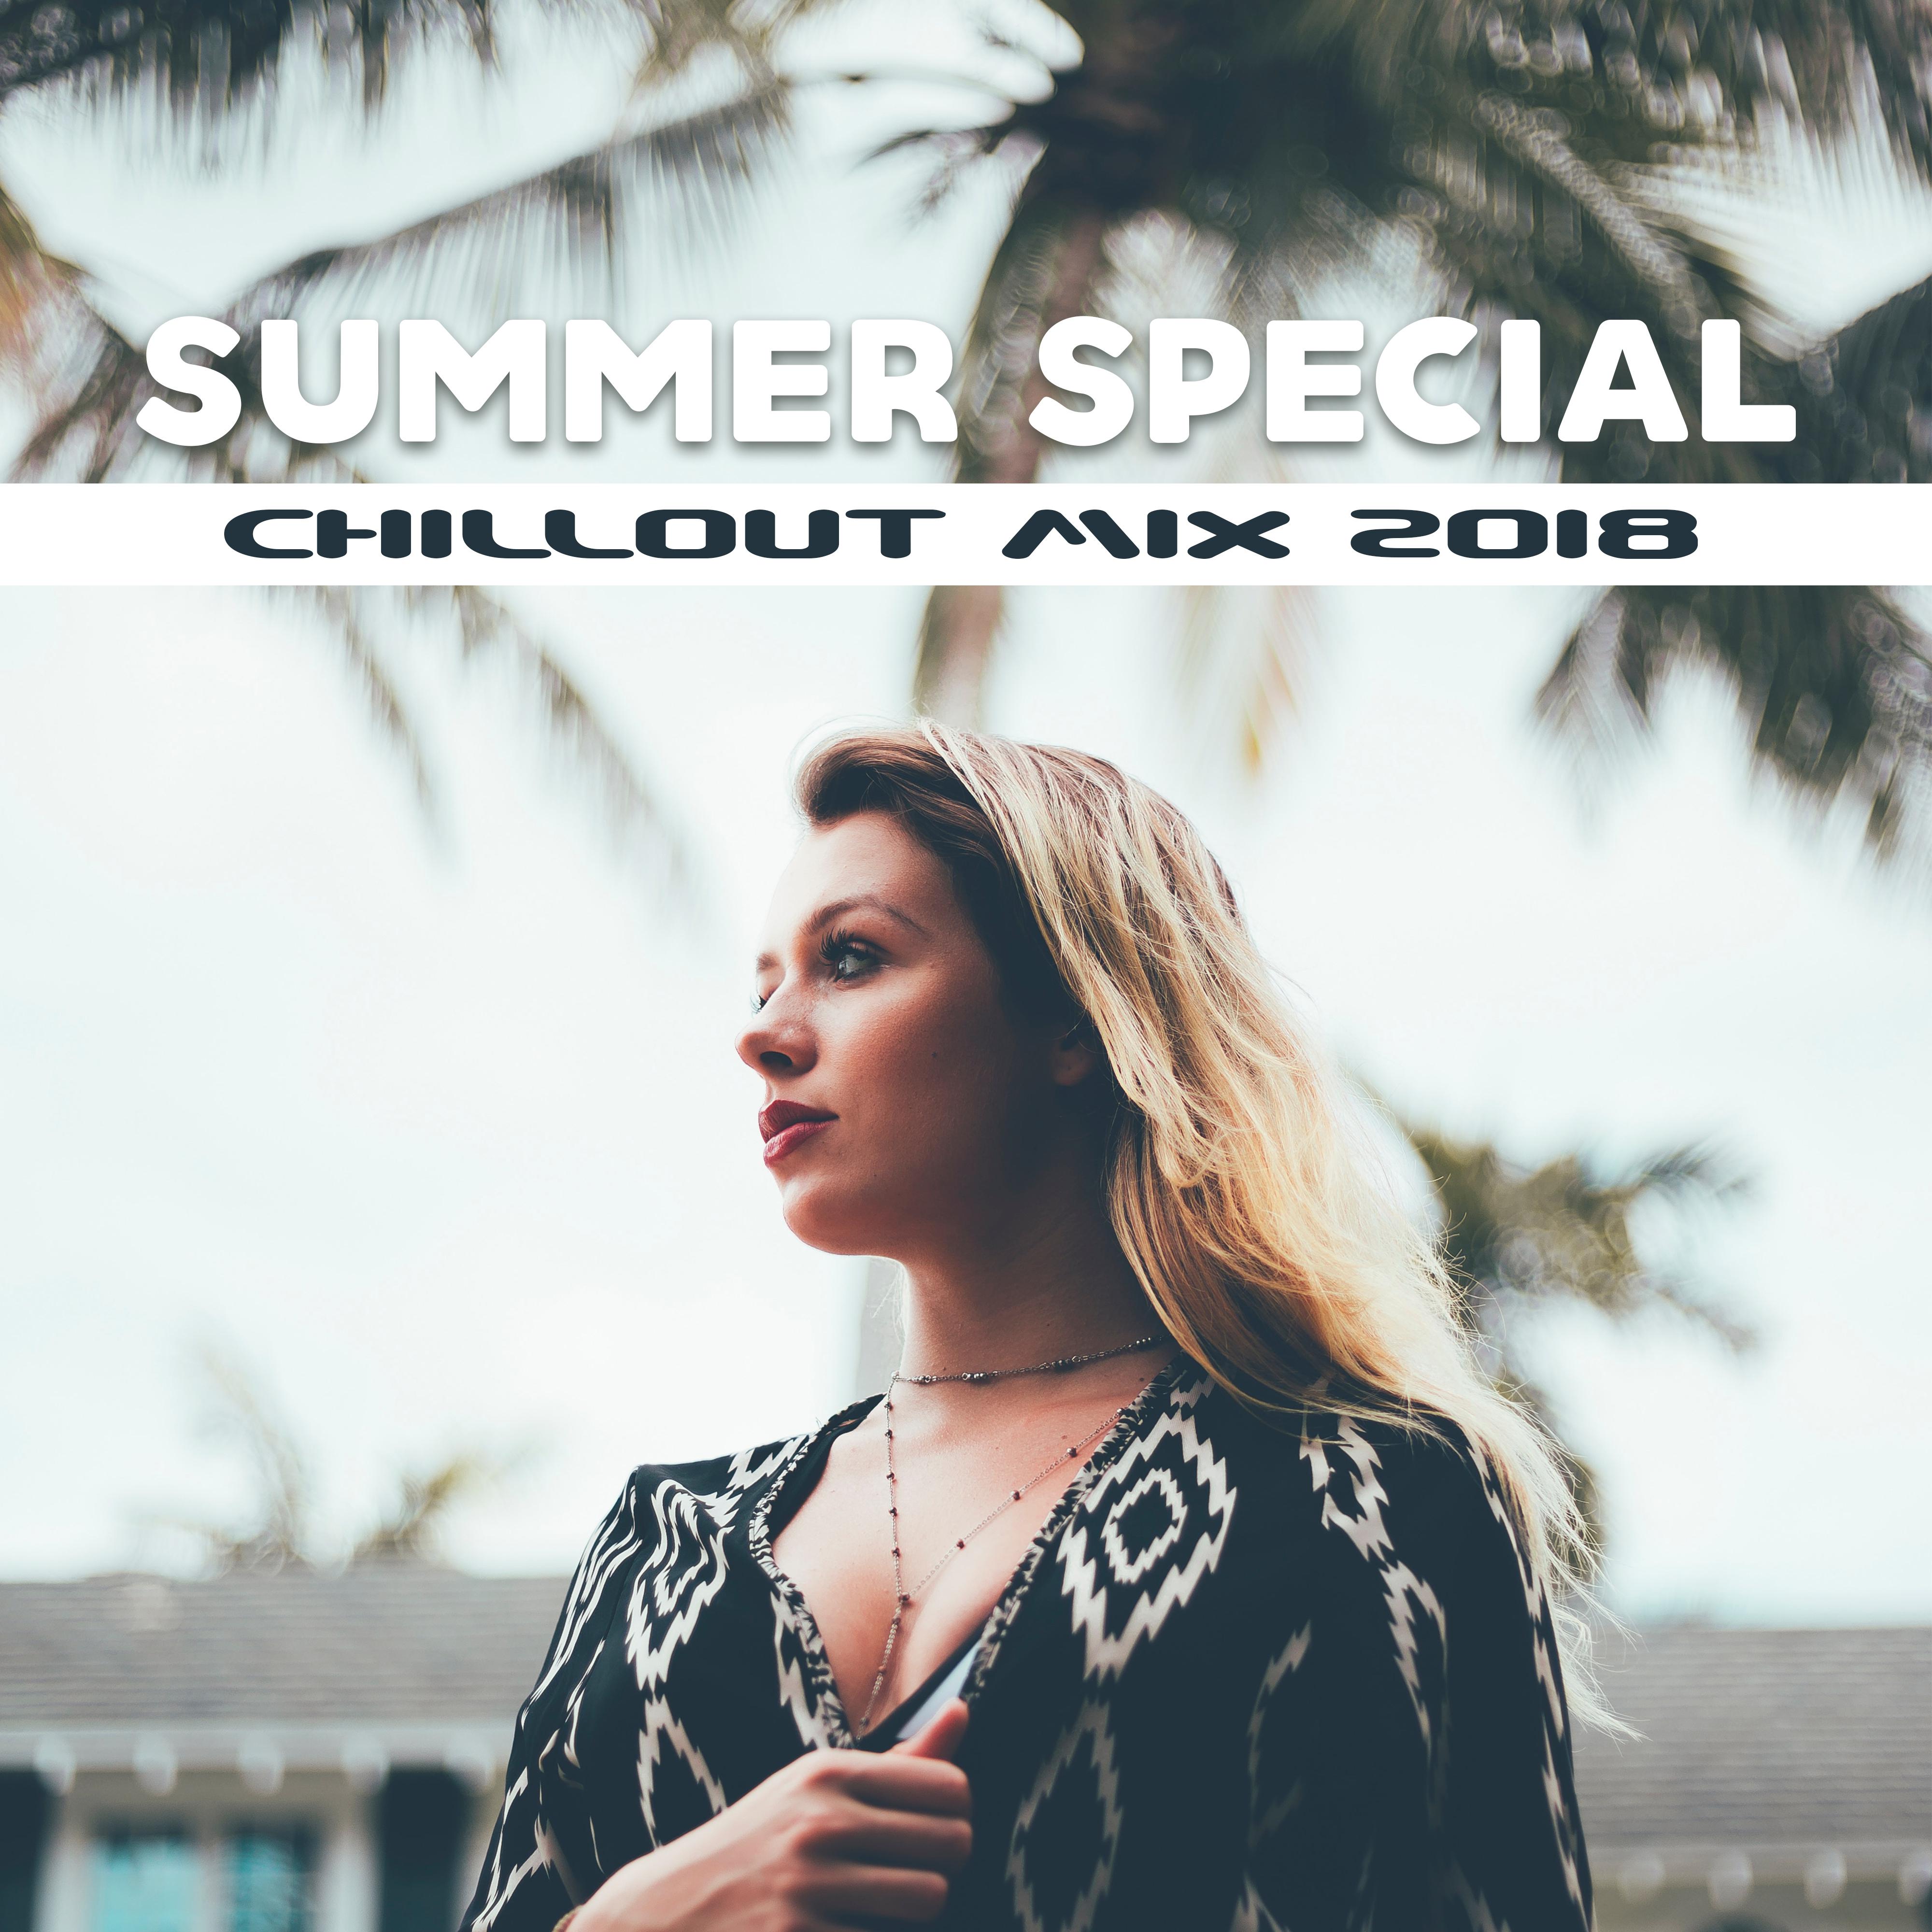 Summer Special Chillout MIX 2018